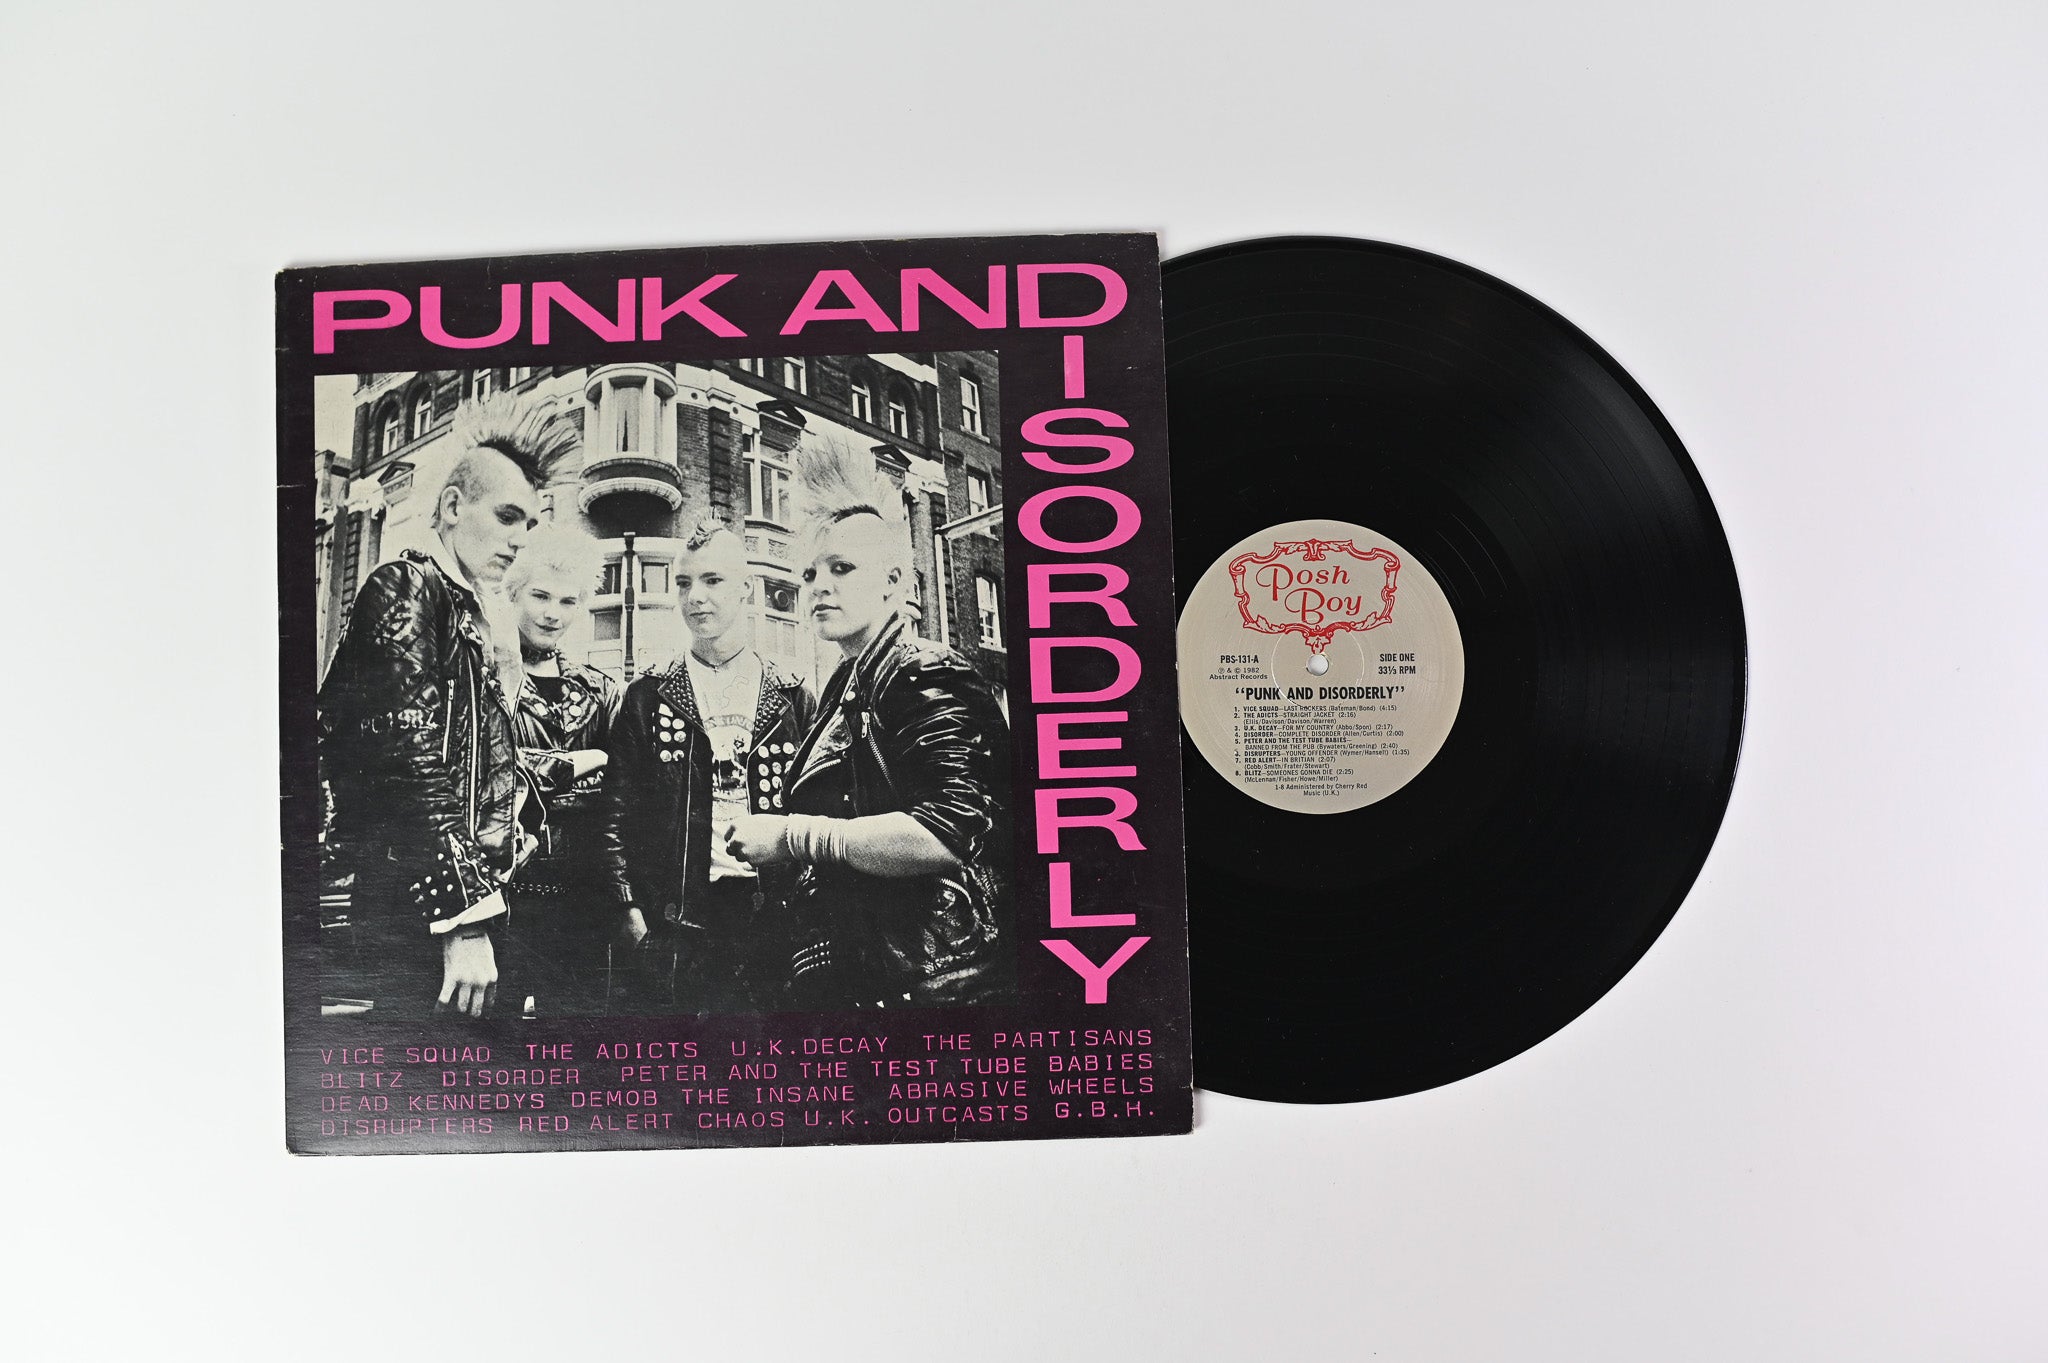 Various - Punk And Disorderly on Posh Boy